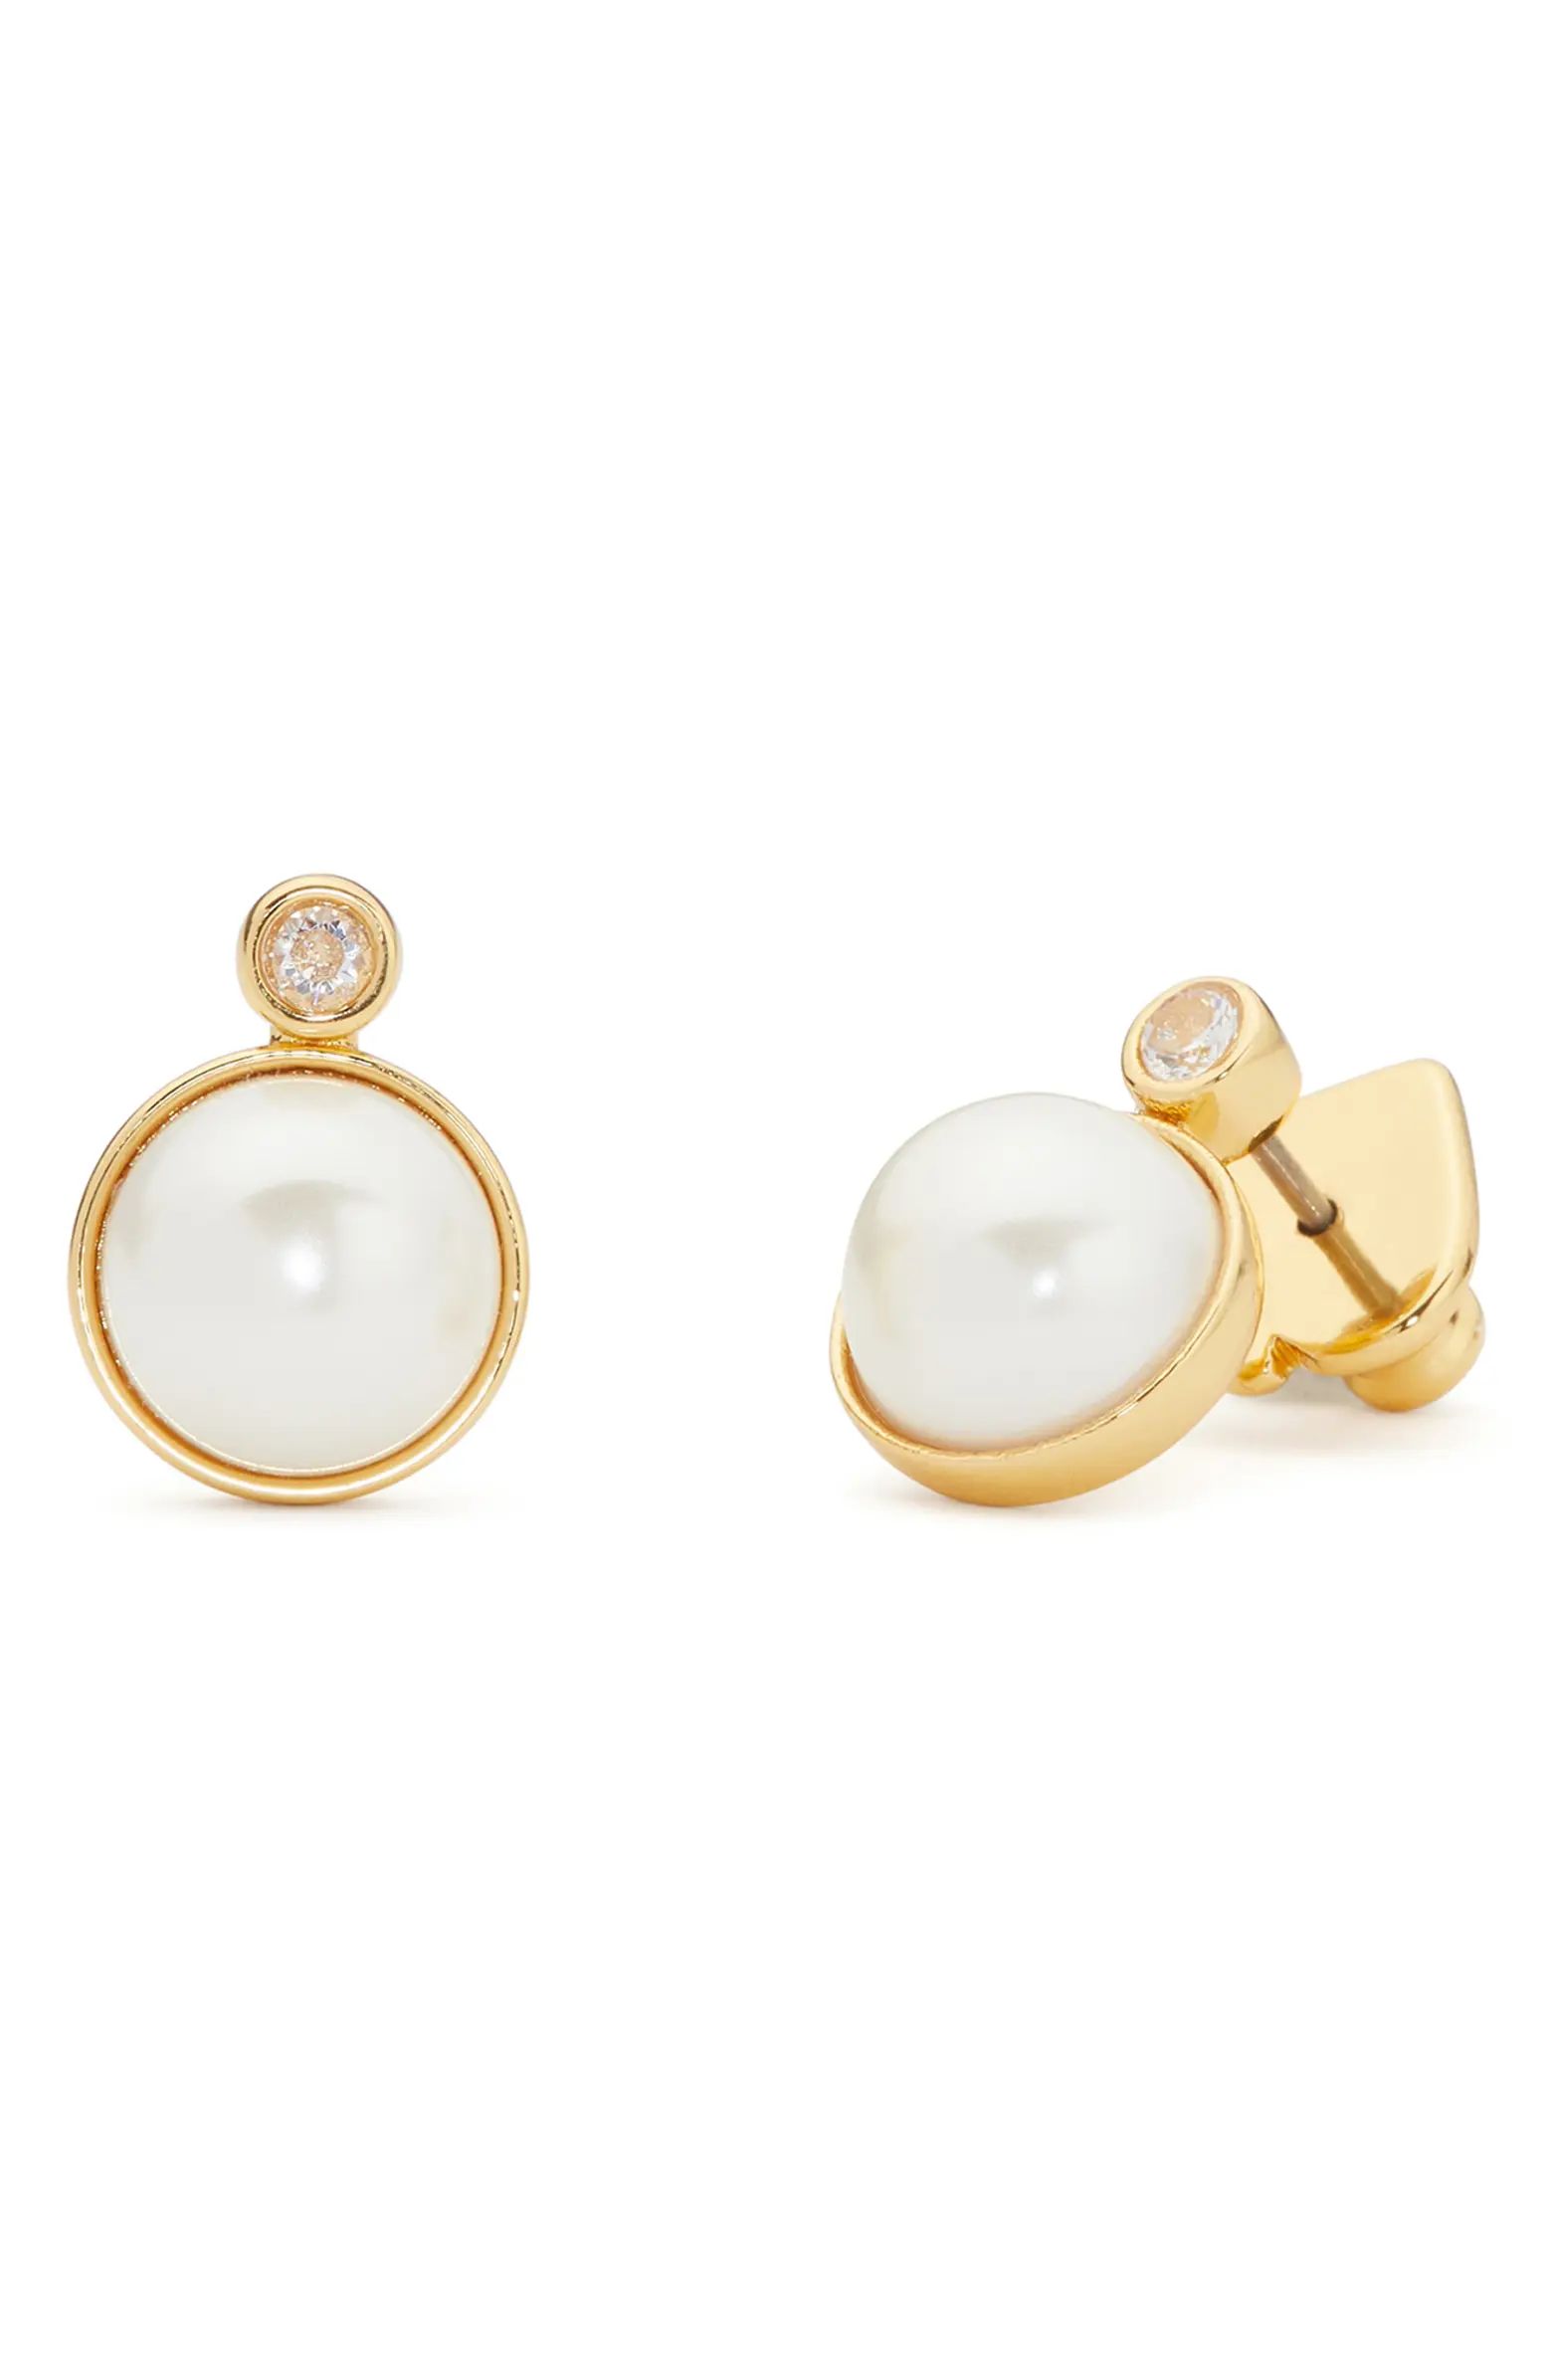 kate spade new york have a ball stud earrings | Nordstrom | Nordstrom